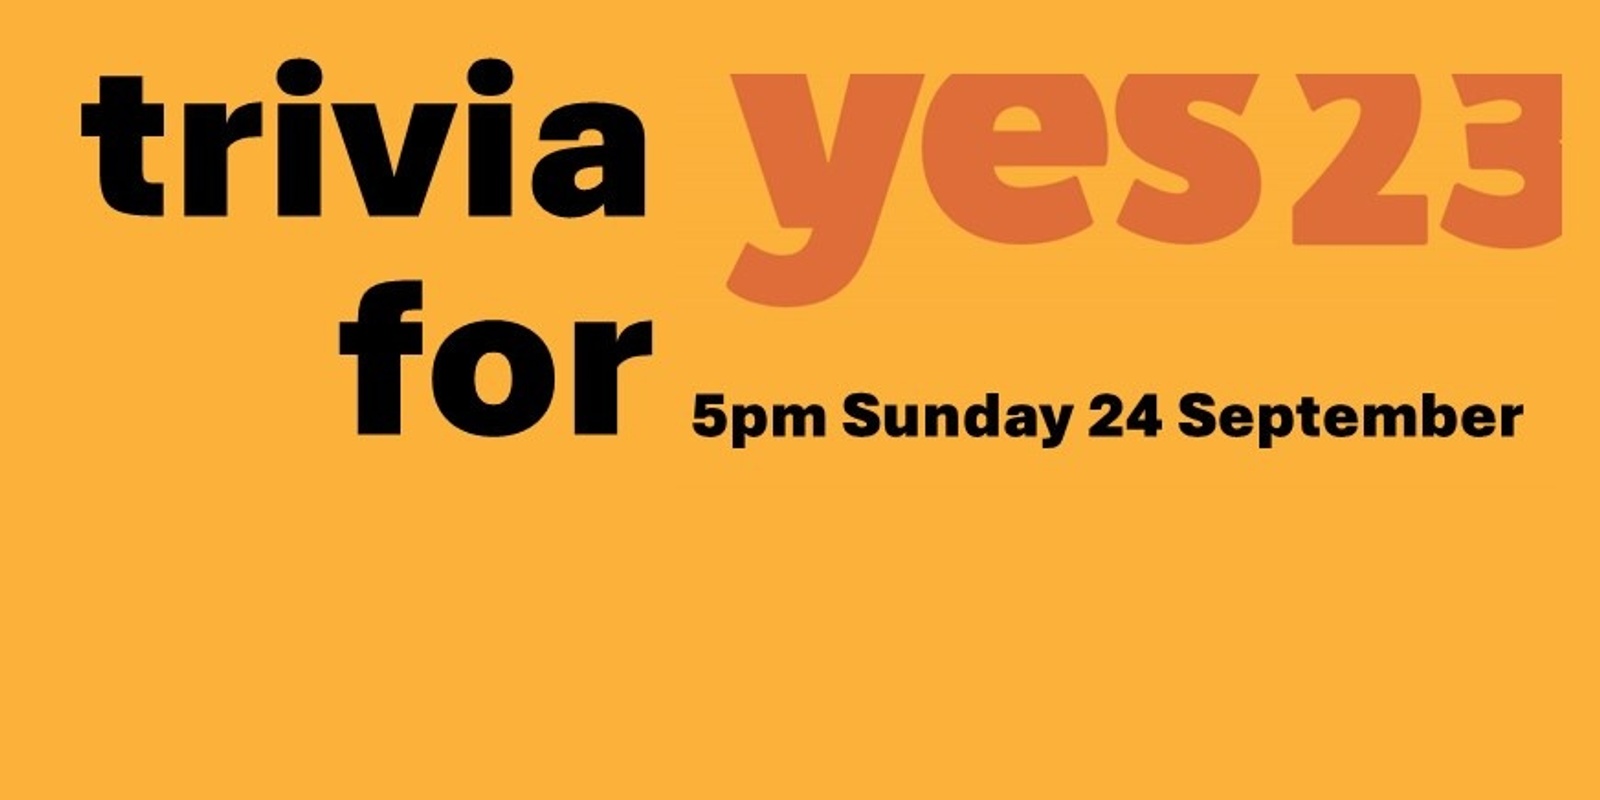 Banner image for Trivia for the Voice